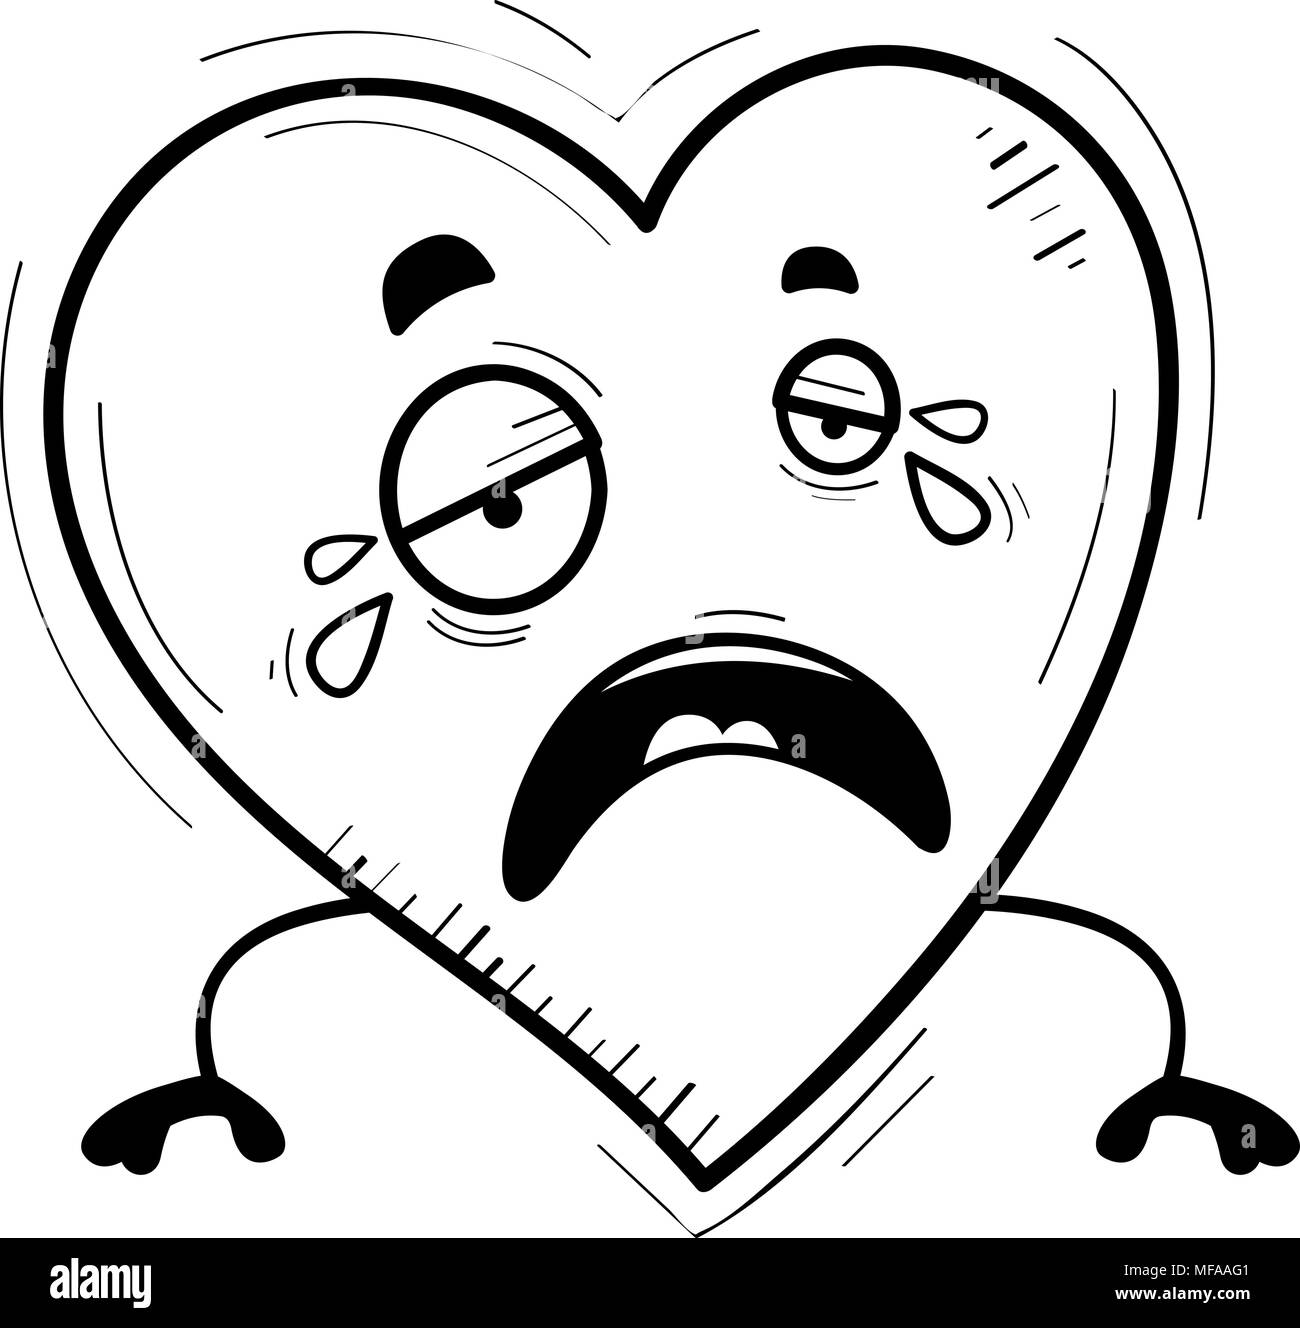 A cartoon illustration of a heart crying. Stock Vector